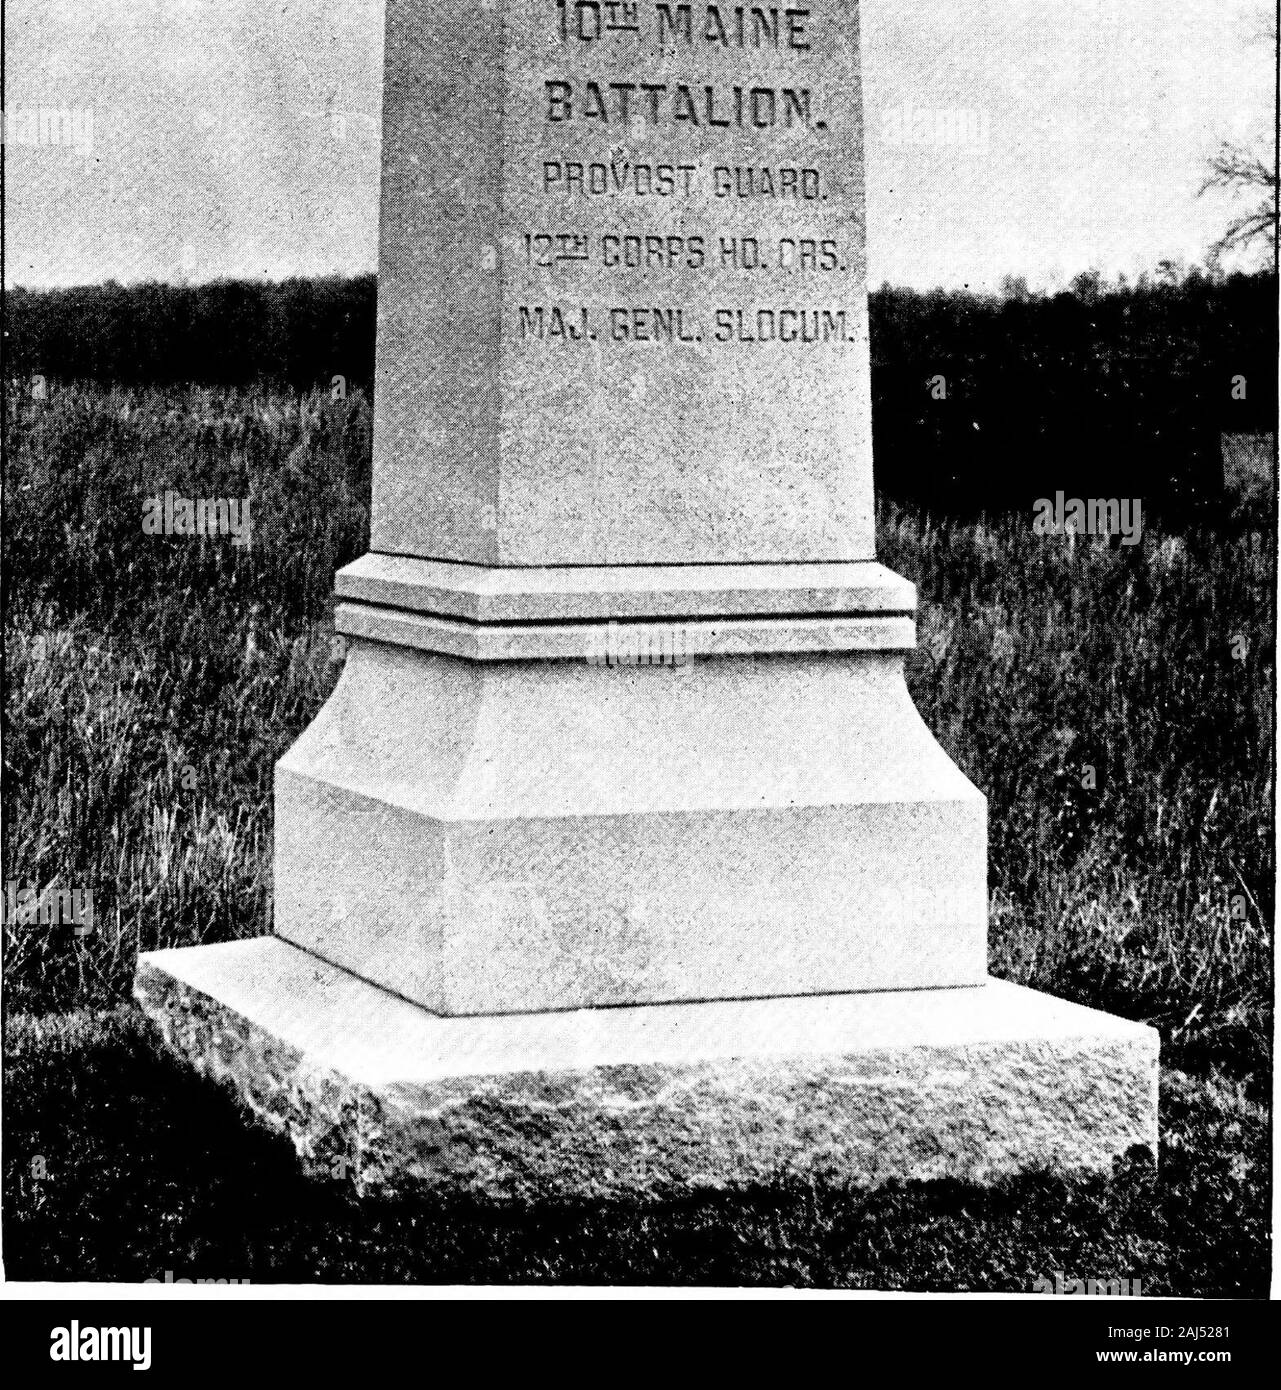 Maine at Gettysburg [electronic resource] . is O. Cowan, Dec. 2,1862; George Prince, Dec. 9, 1862; George Cary, Jan. 4, 1863; Reuben B.Jennings, Jan. 15, 1863; Black H. Putnam, Feb. 19, 1863; Robert F. Dyer,June 4, 1863,—recommissioned in and tr. from 1st D. C. Cav., resigned Nov.21, 1864. First Lieutenants: Charles S. Crosby, Oct. 31, 1861; John C. C.Bowen, Feb. 18, 1862; Charles H. Baker, June 13, 1862; George Weston,Oct. 10, 1862; John R. Webb, Oct. 14, 1862; John H. Goddard, Feb. 23,1863, for disability; Evans S. Pillsbury, Mar. 5, 1863, for disability; DudleyL. Haines, Mar. 12, 1863; Geor Stock Photo